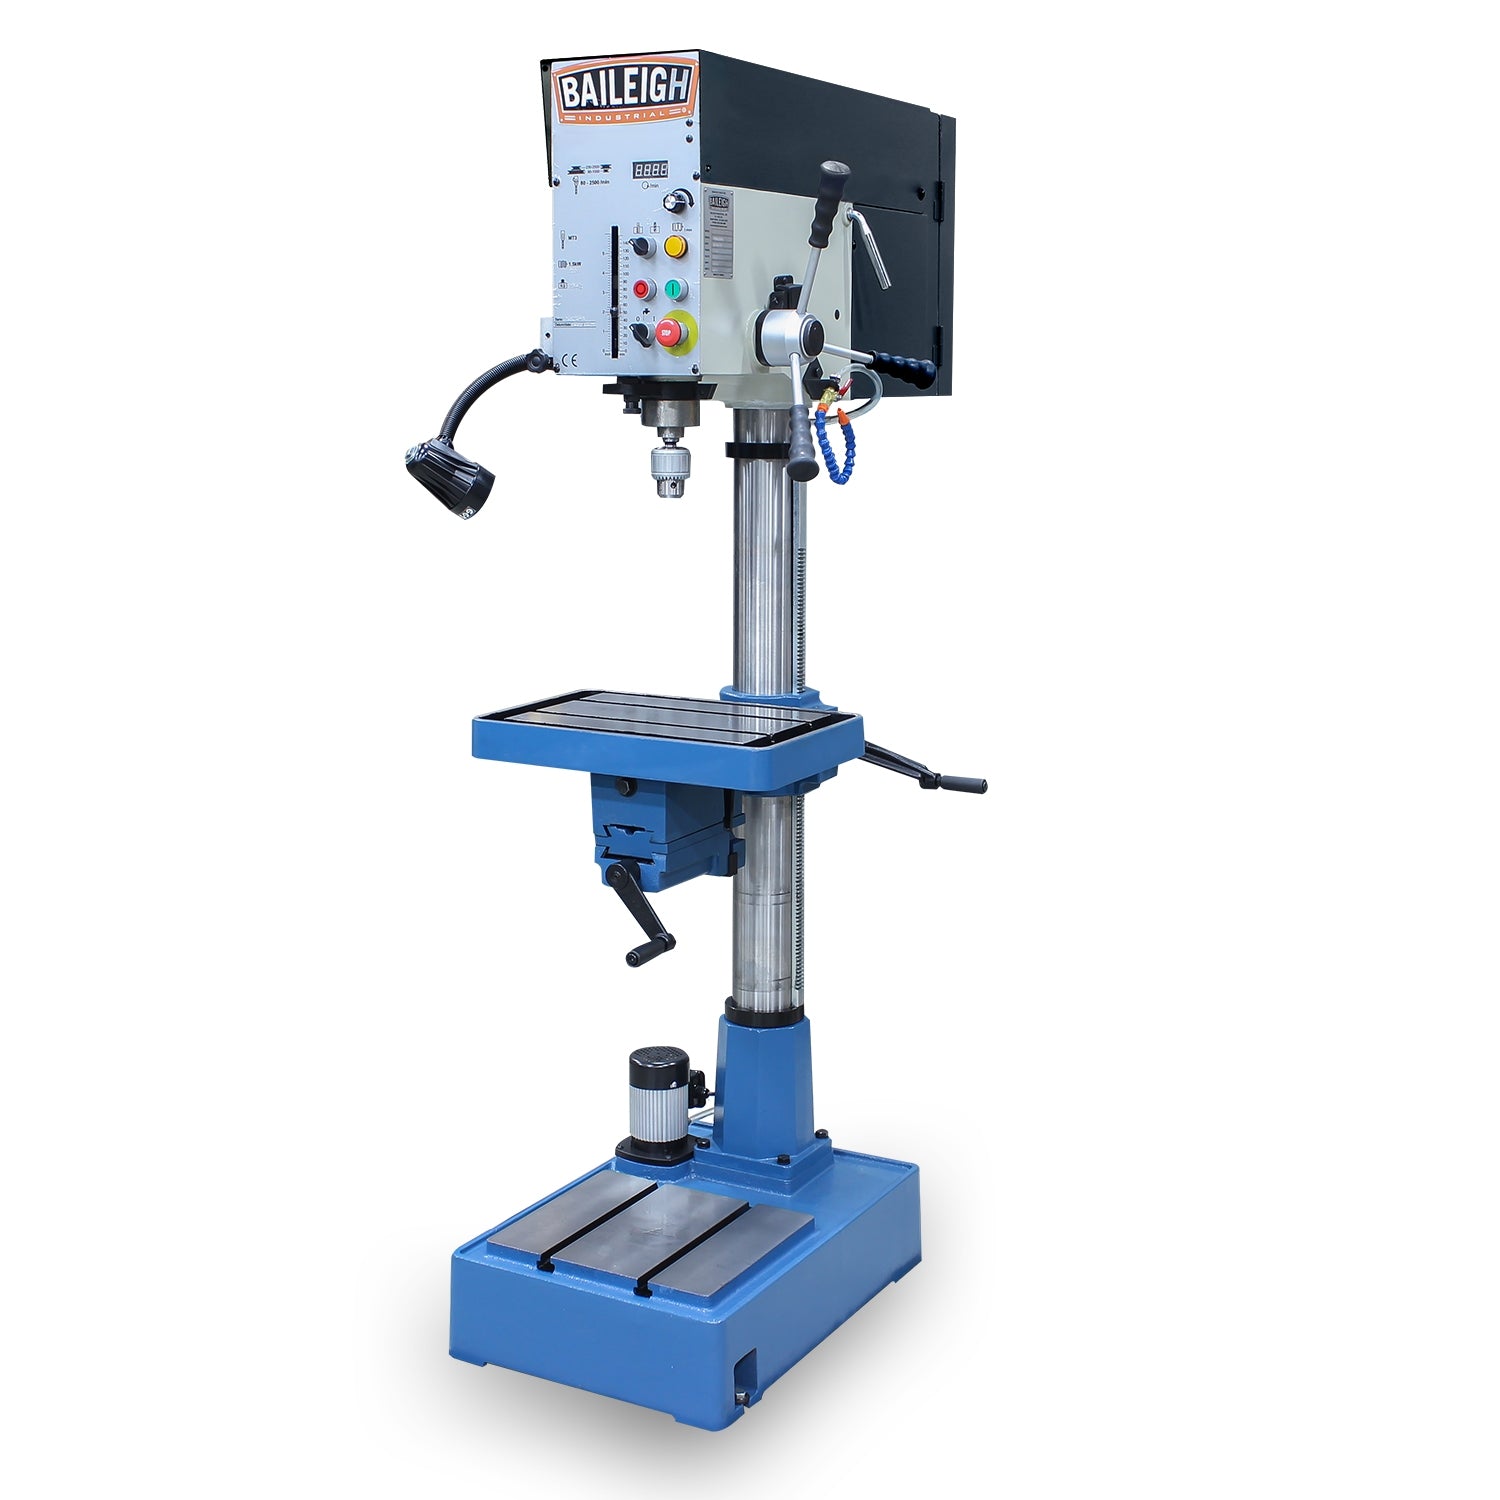 Baileigh DP-1400VS 220V 1 Phase Inverter Driven Drill Press, Integrated Vise, Tapping, 1-1/4" Mild Steel Capacity